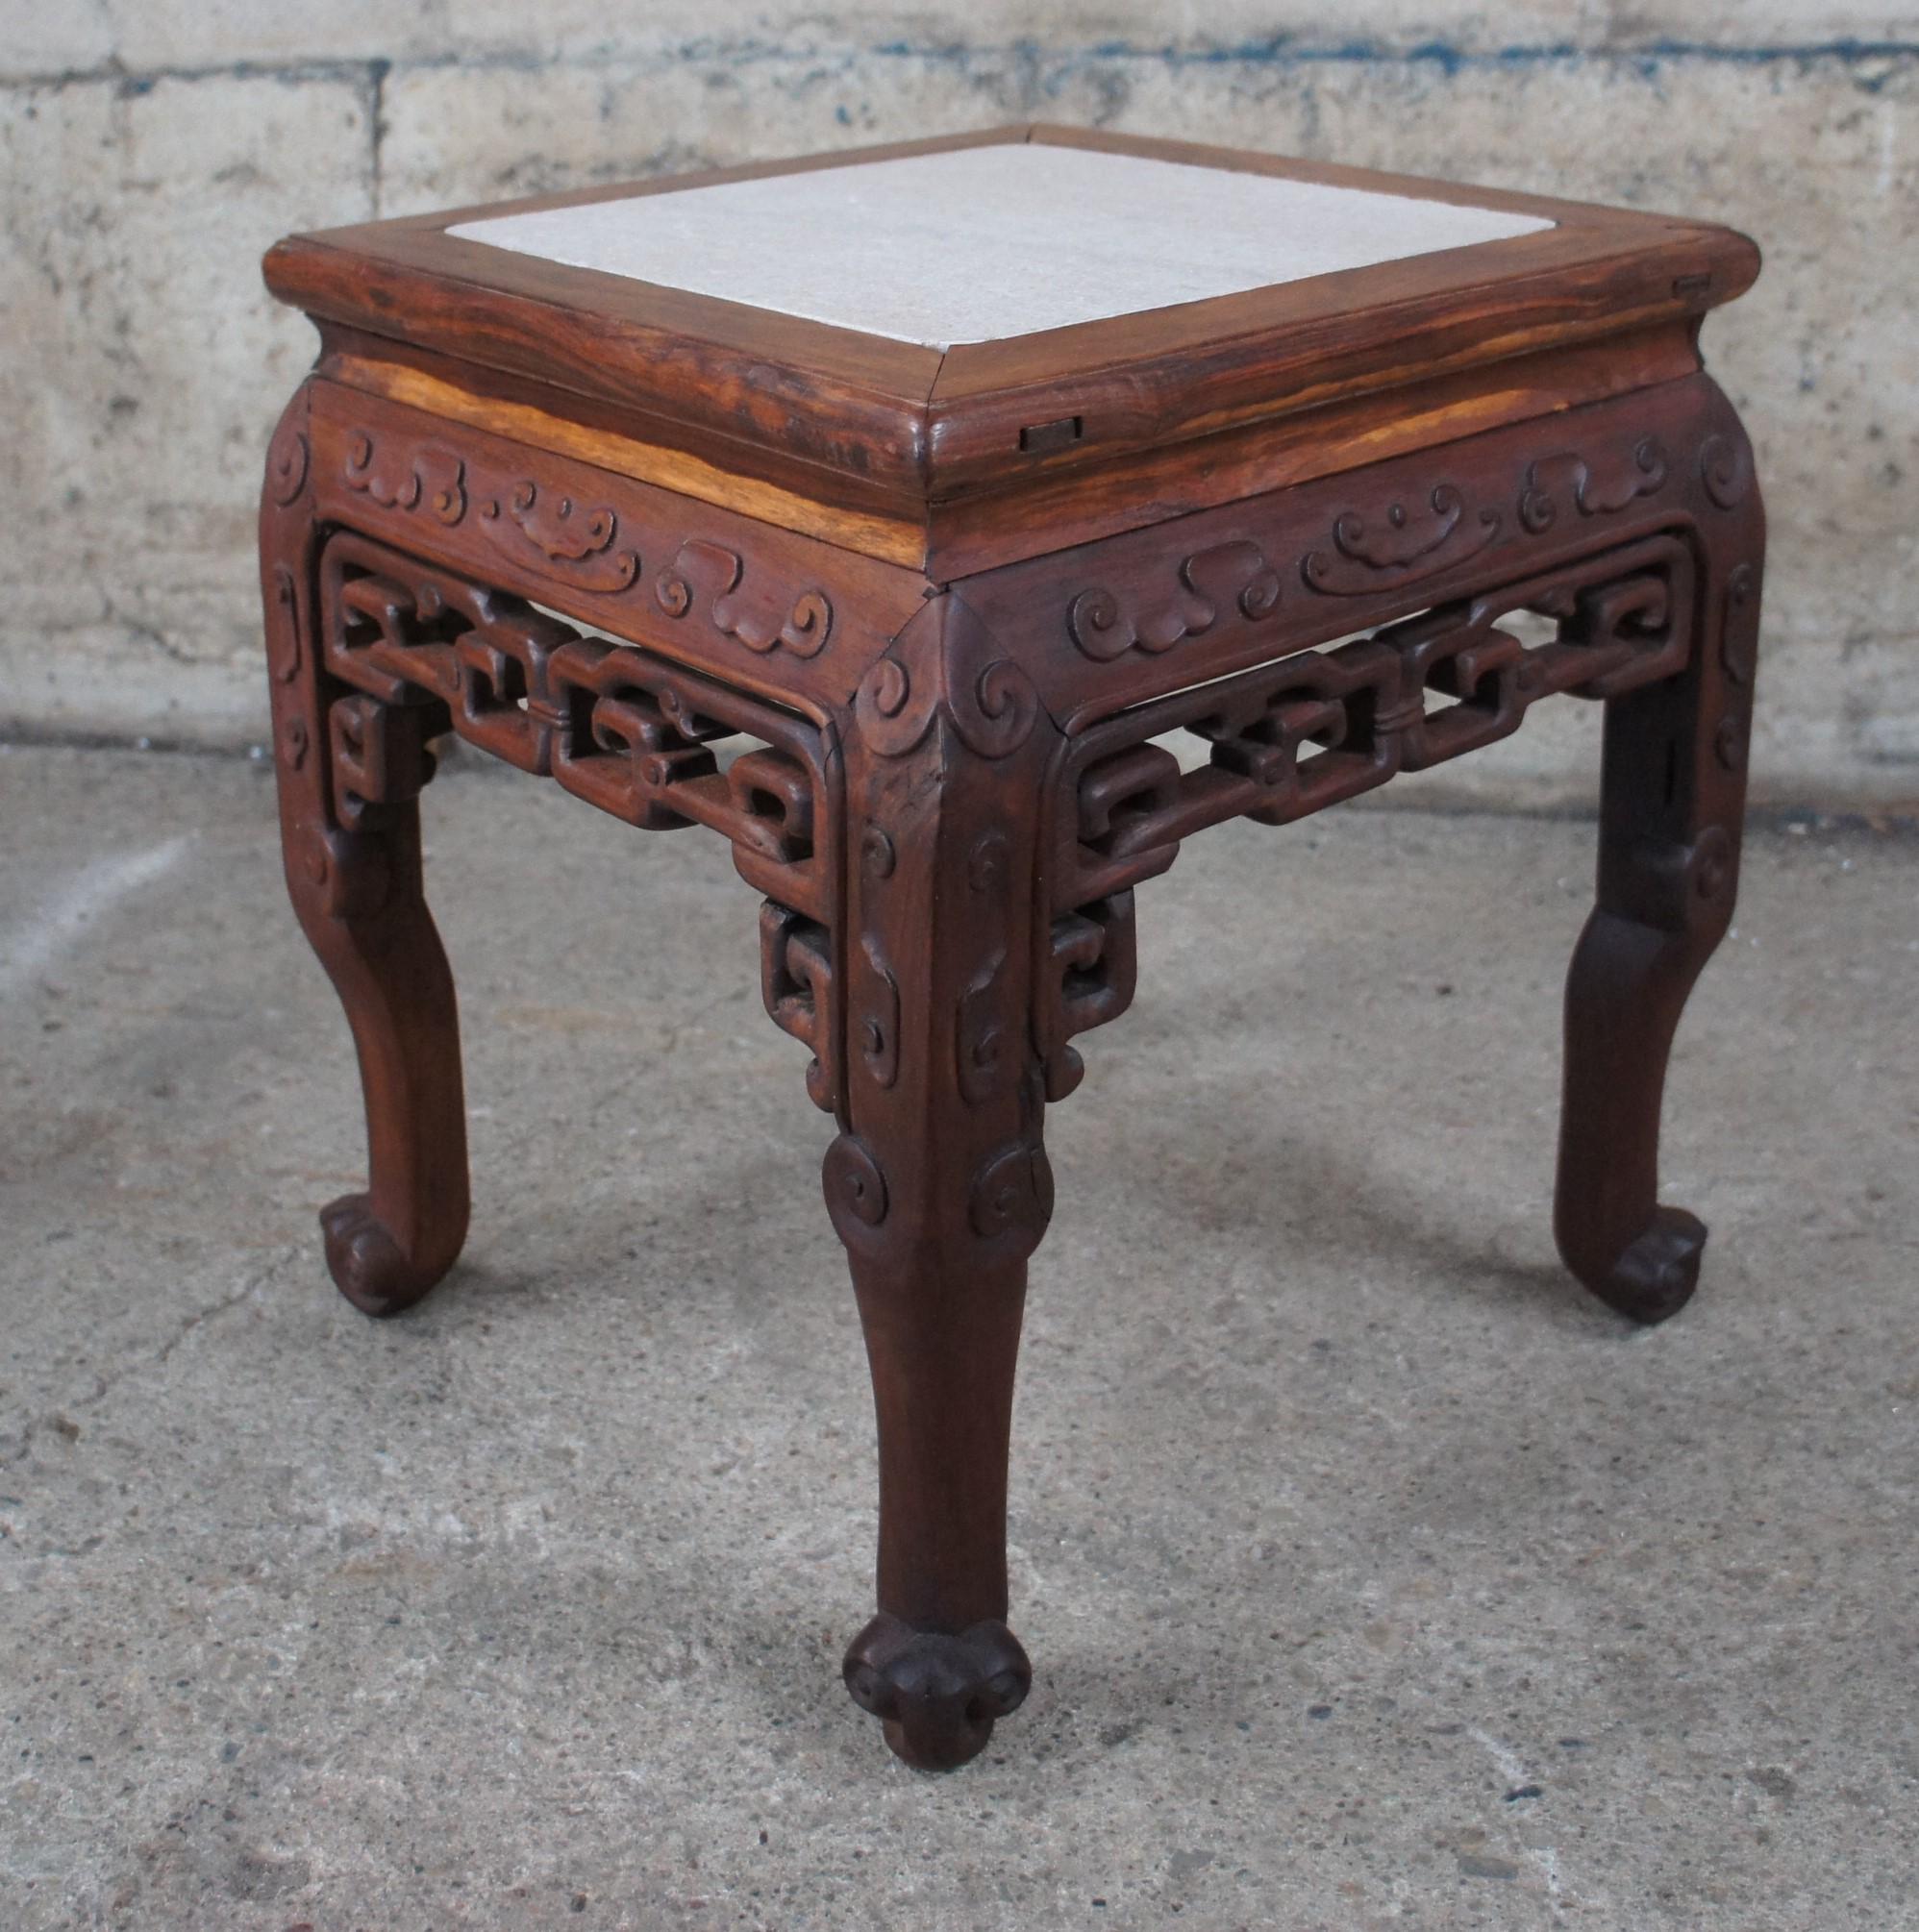 Antique Chinese Rosewood Carved Marble Top Side Table Stool Plant Stand Pedestal For Sale 2